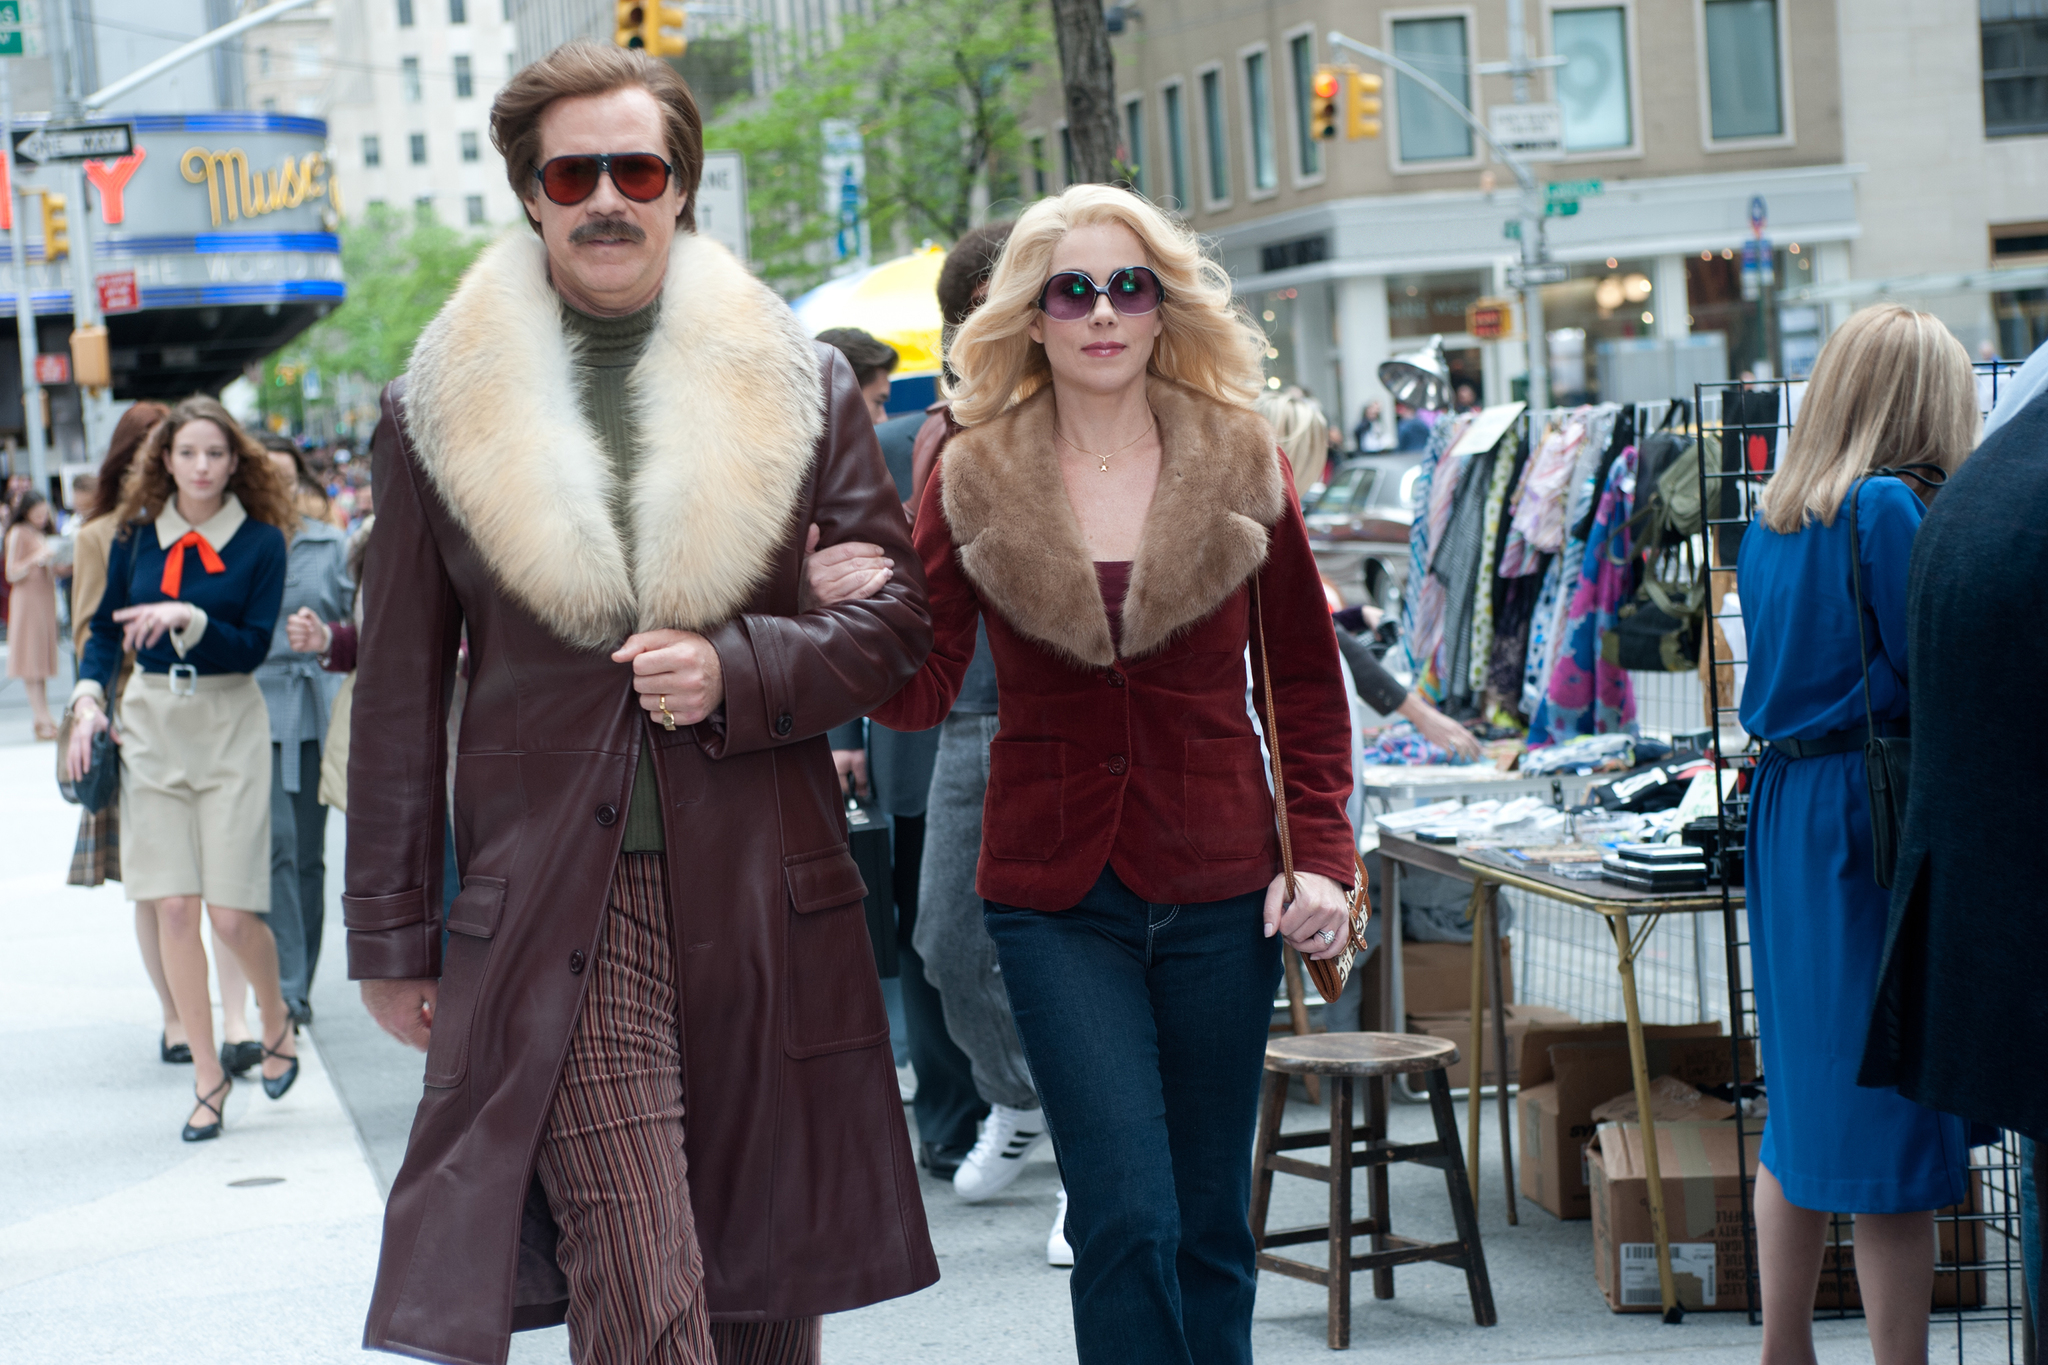 Still of Christina Applegate and Will Ferrell in Anchorman 2: The Legend Continues (2013)